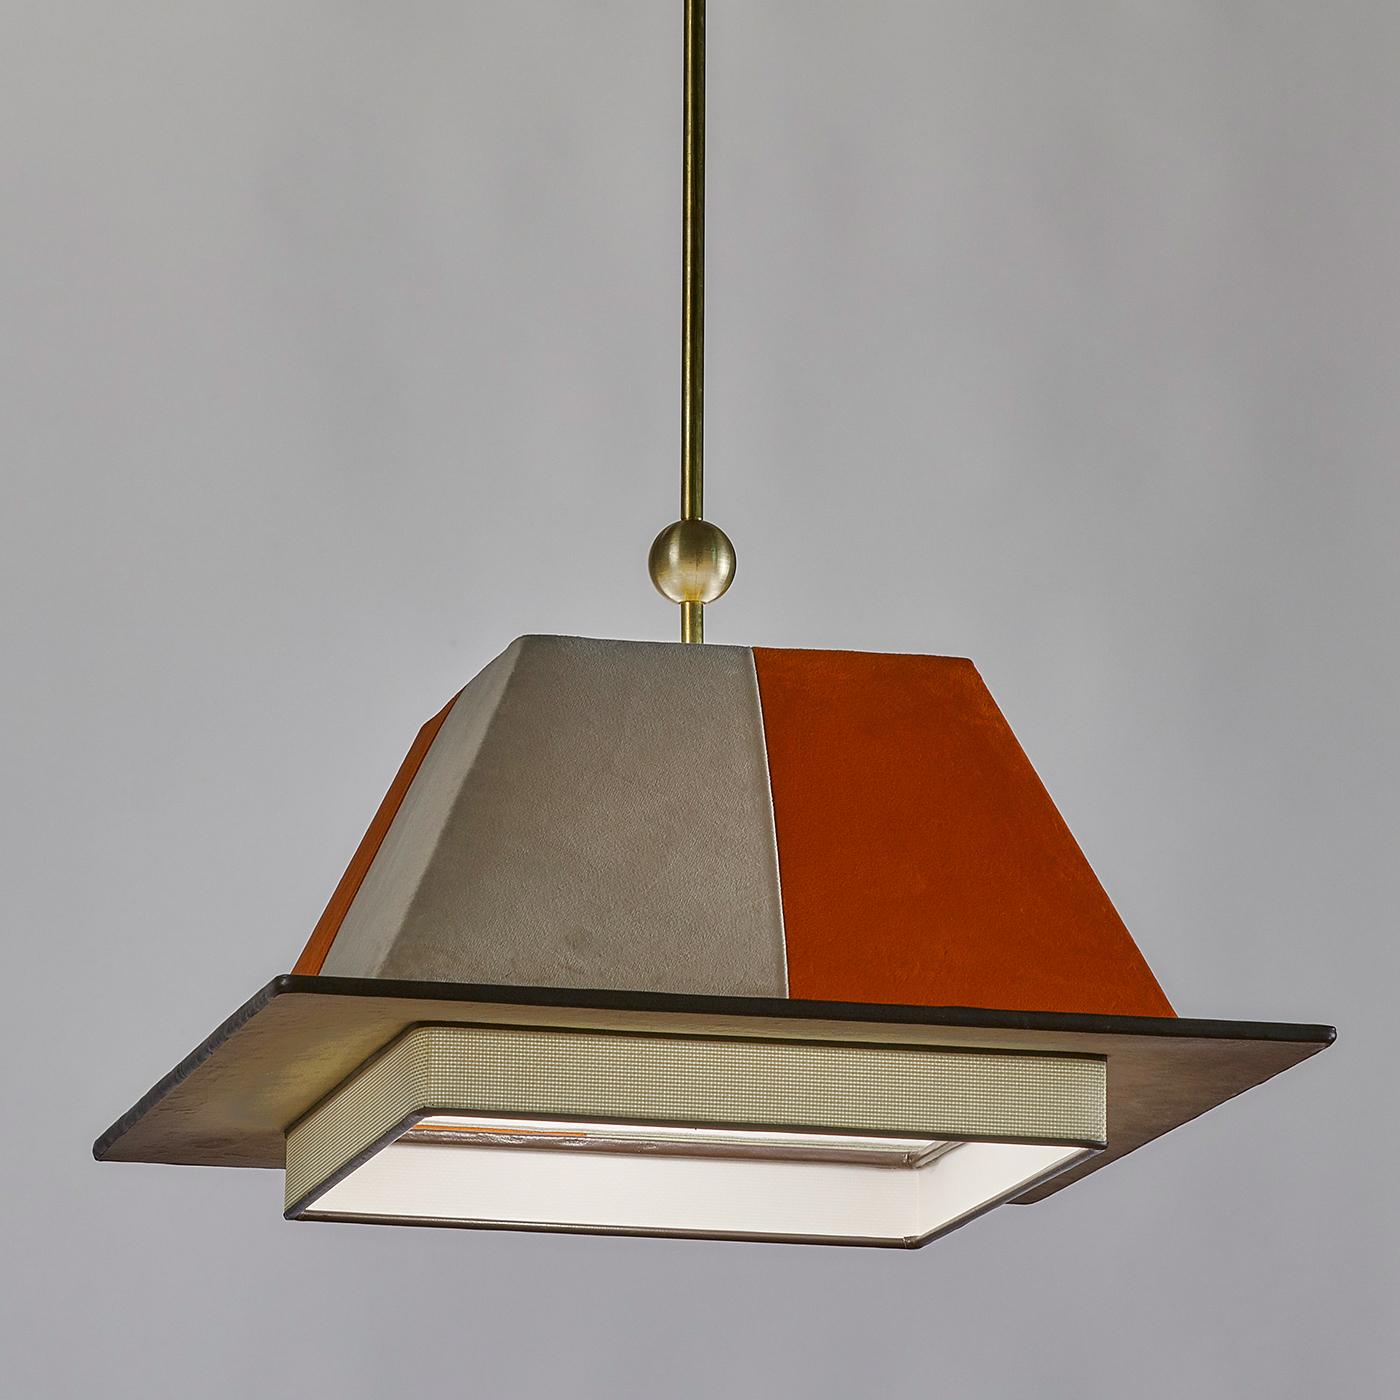 Reminiscent of the shape of the traditional graduation cap, this elegant pendant light of the Chapeau Collection (hat in French) has a trapezoidal top in alternating sections of orange and putty-gray velvet. Resting on the square frame with a